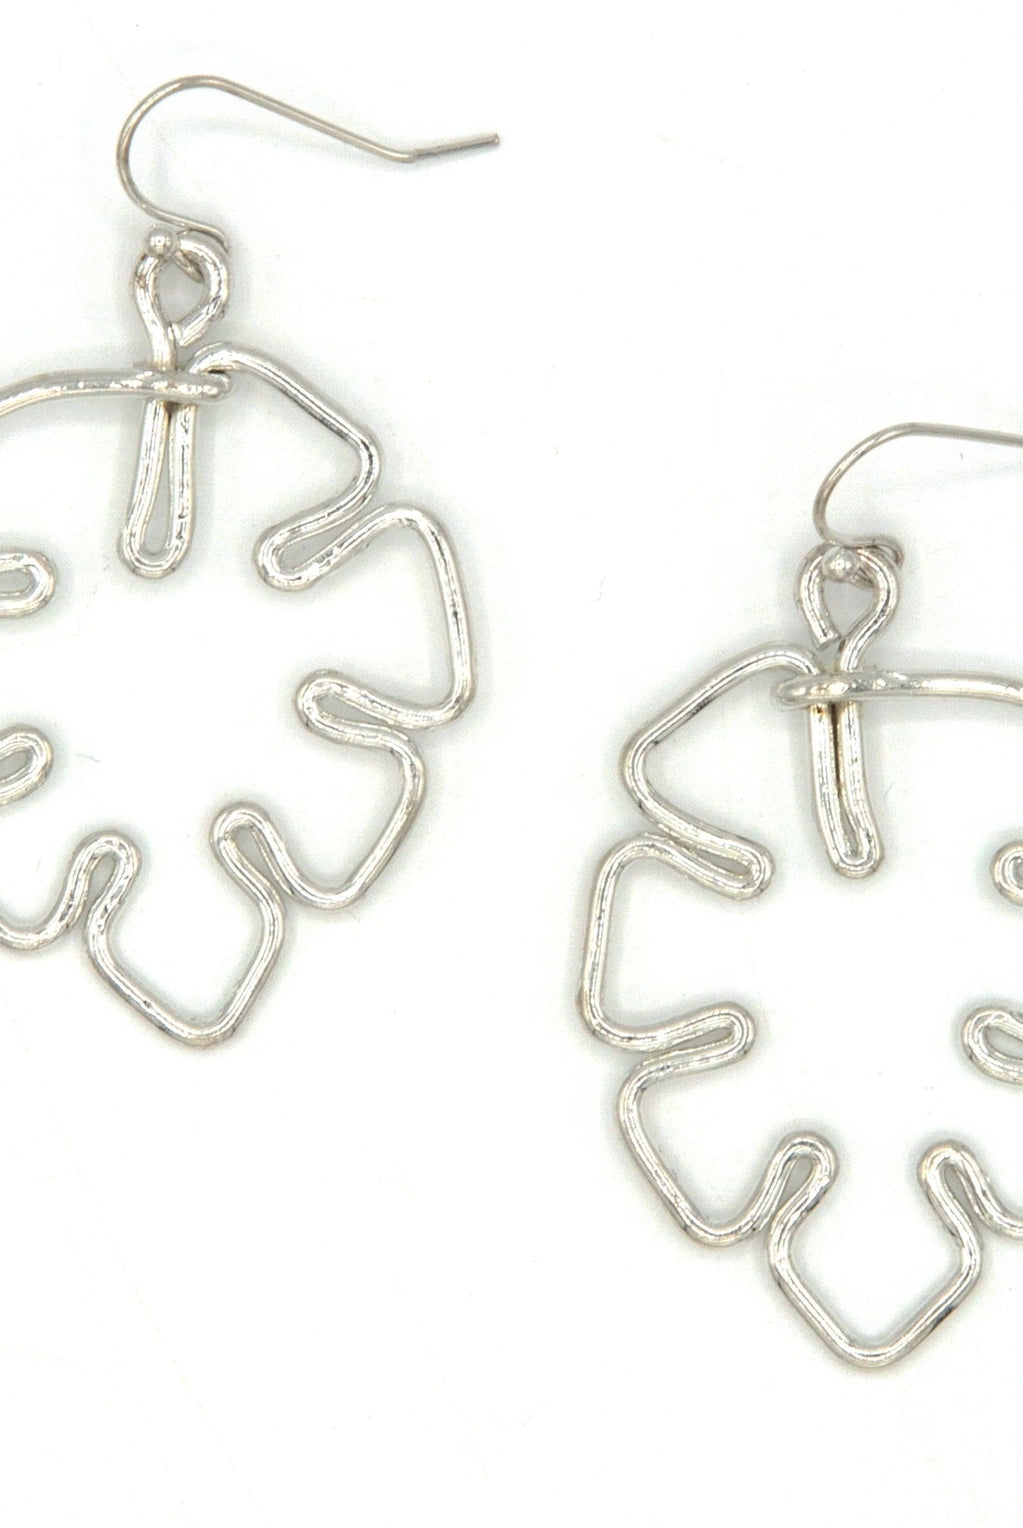 Continuous Line Art Earrings, Monstera